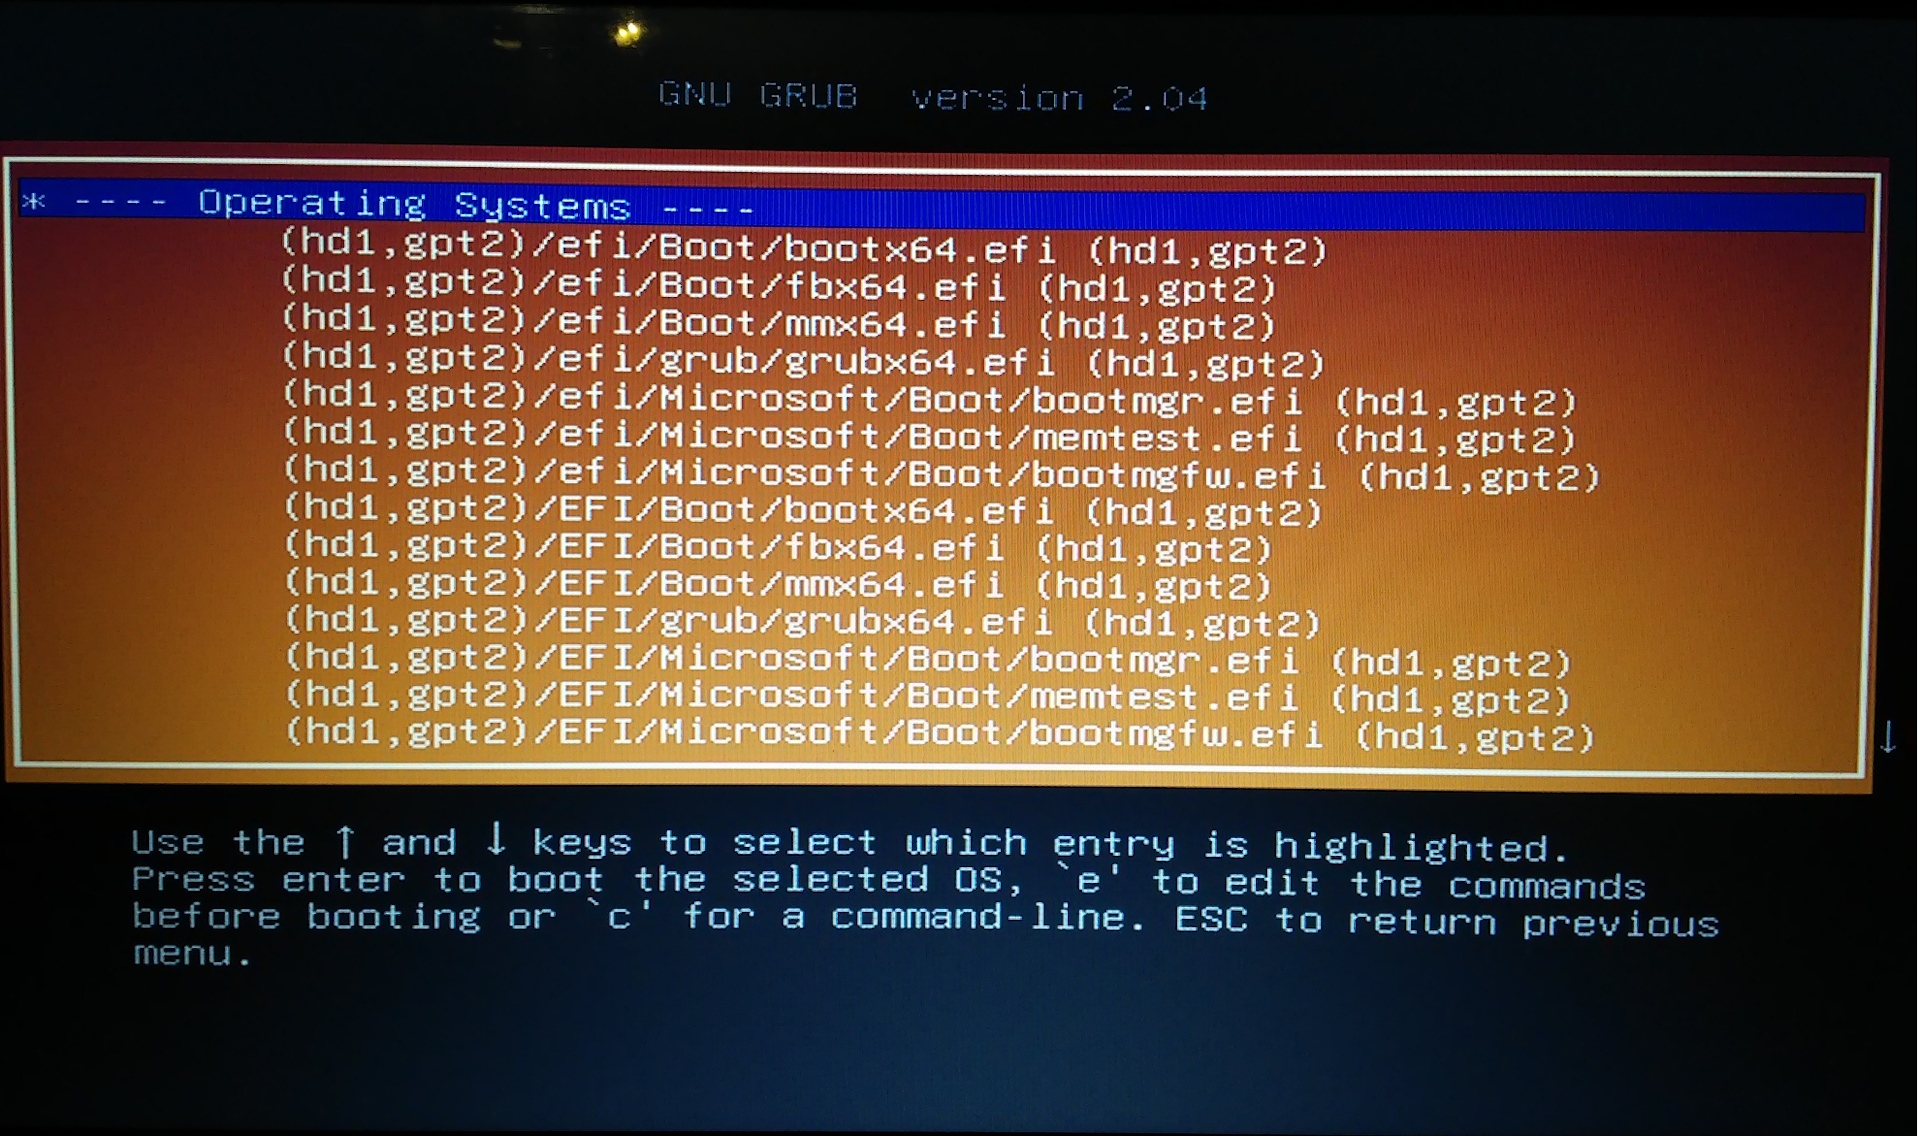 Super Grub2 Disk operating systems detected